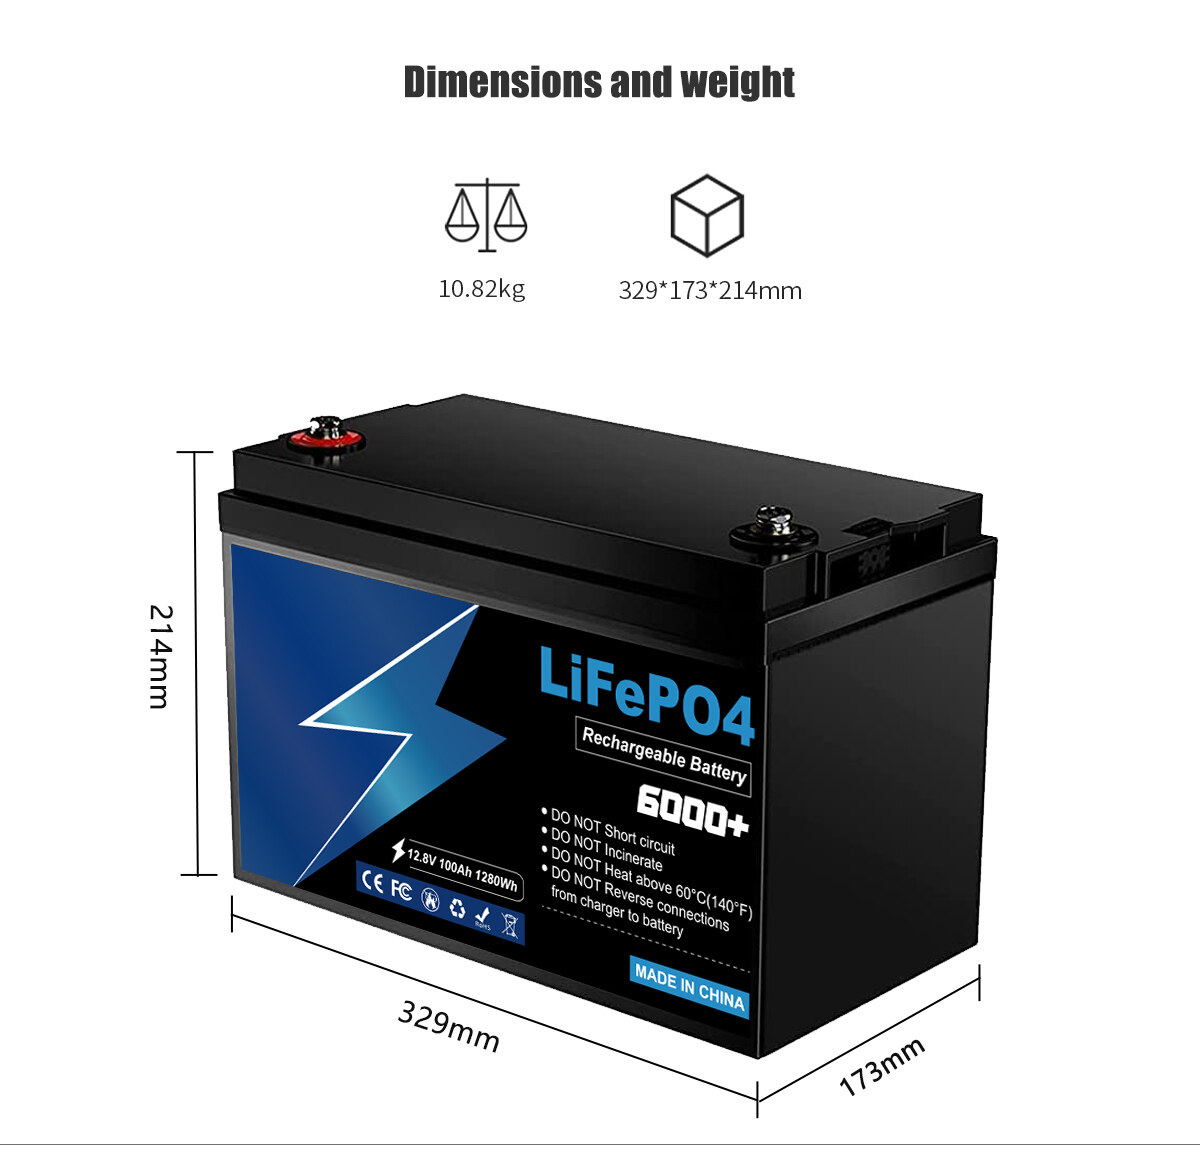 odm lifepo4 lithium ion battery manufacturer